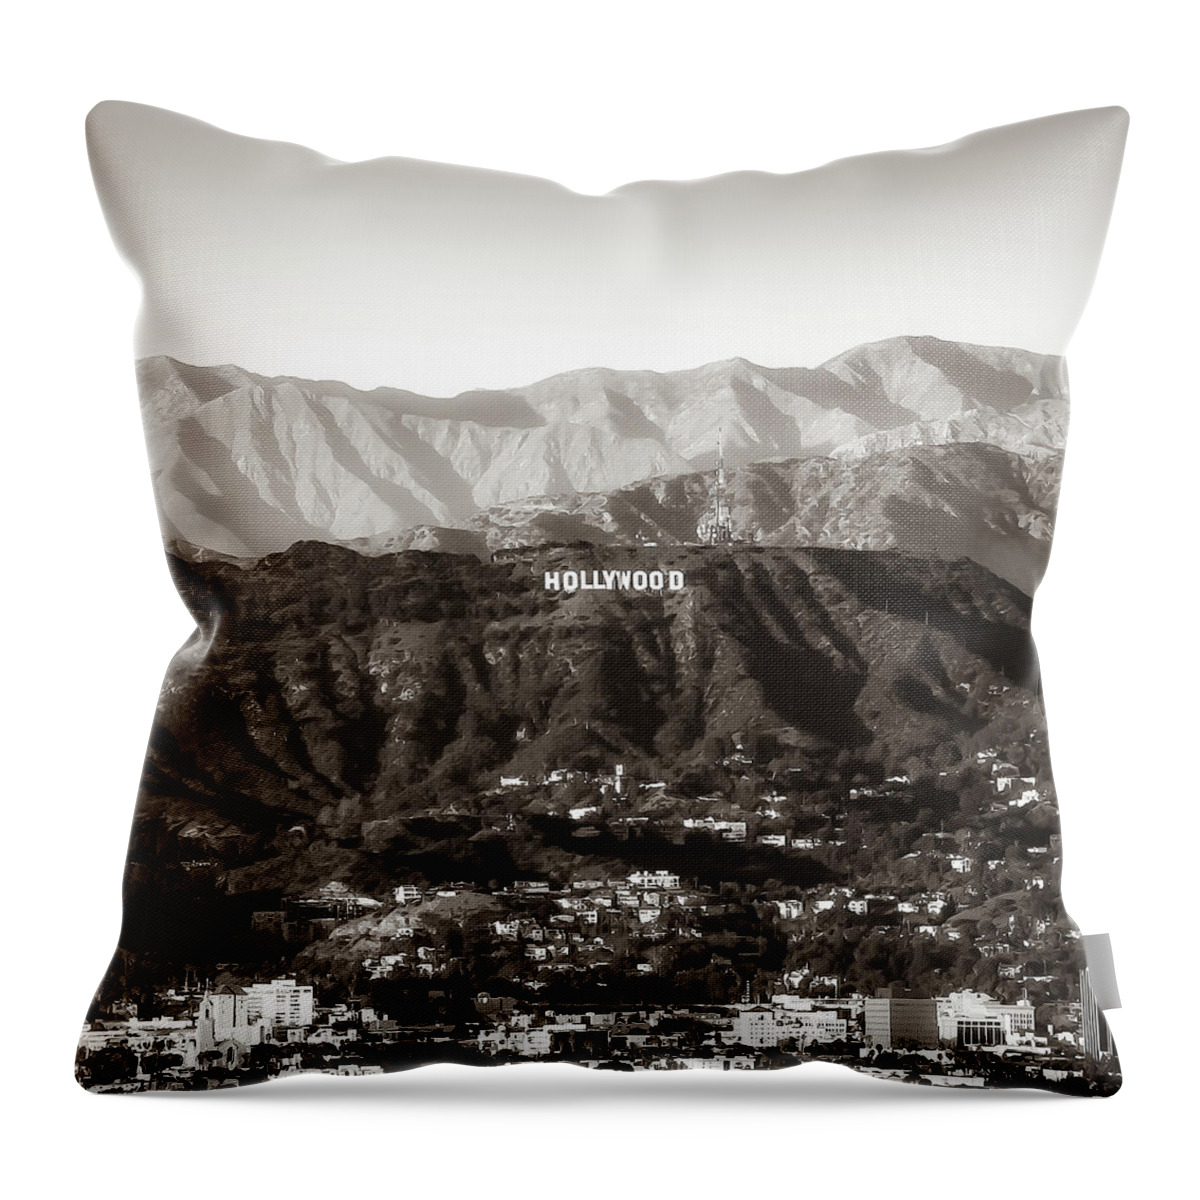 California Throw Pillow featuring the photograph Hollywood Hills On The Santa Monica Mountains - Sepia Square Format by Gregory Ballos